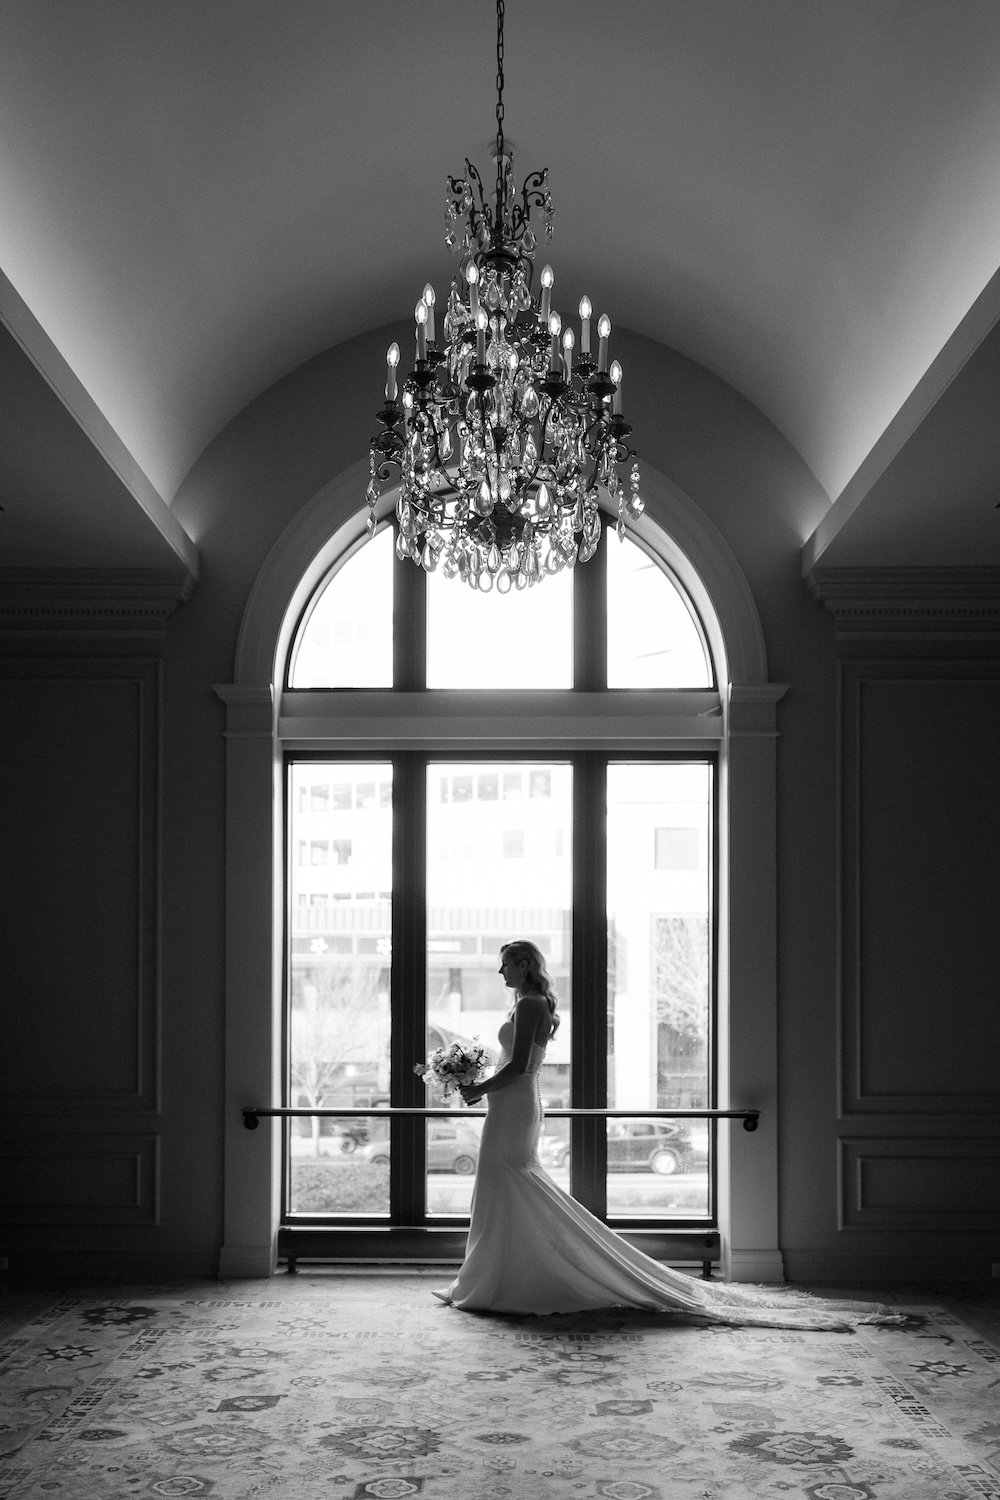 black and white bridal portrait. bride standing in front of large window with chandelier. Modern Washington DC wedding at National Museum of Women in the Arts. Sarah Bradshaw Photography.